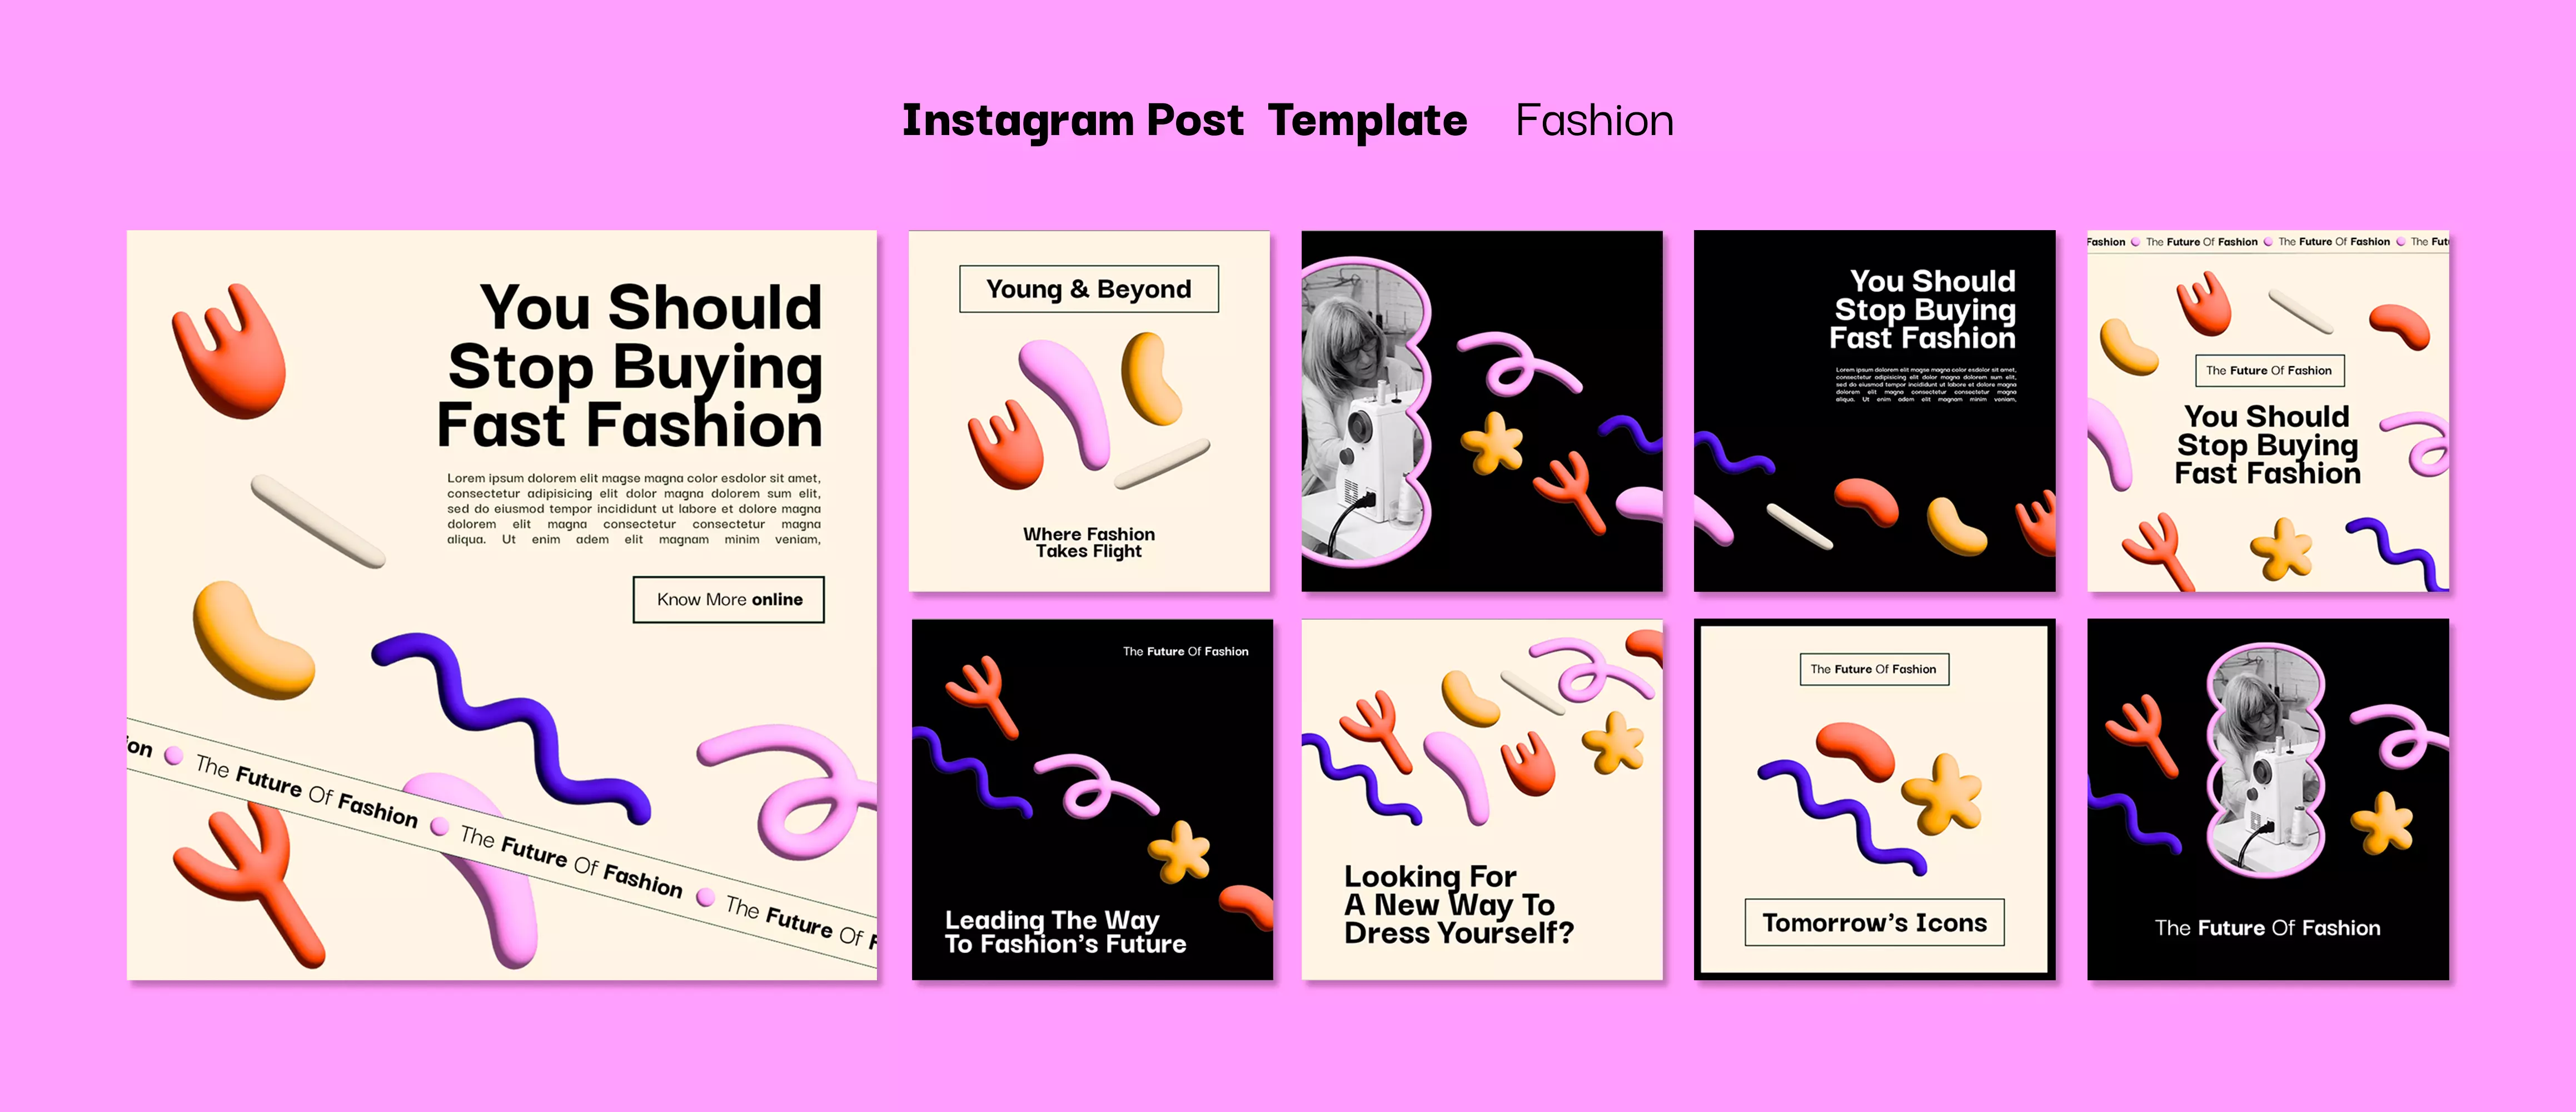 Instagram template with a well-designed concept for fashion